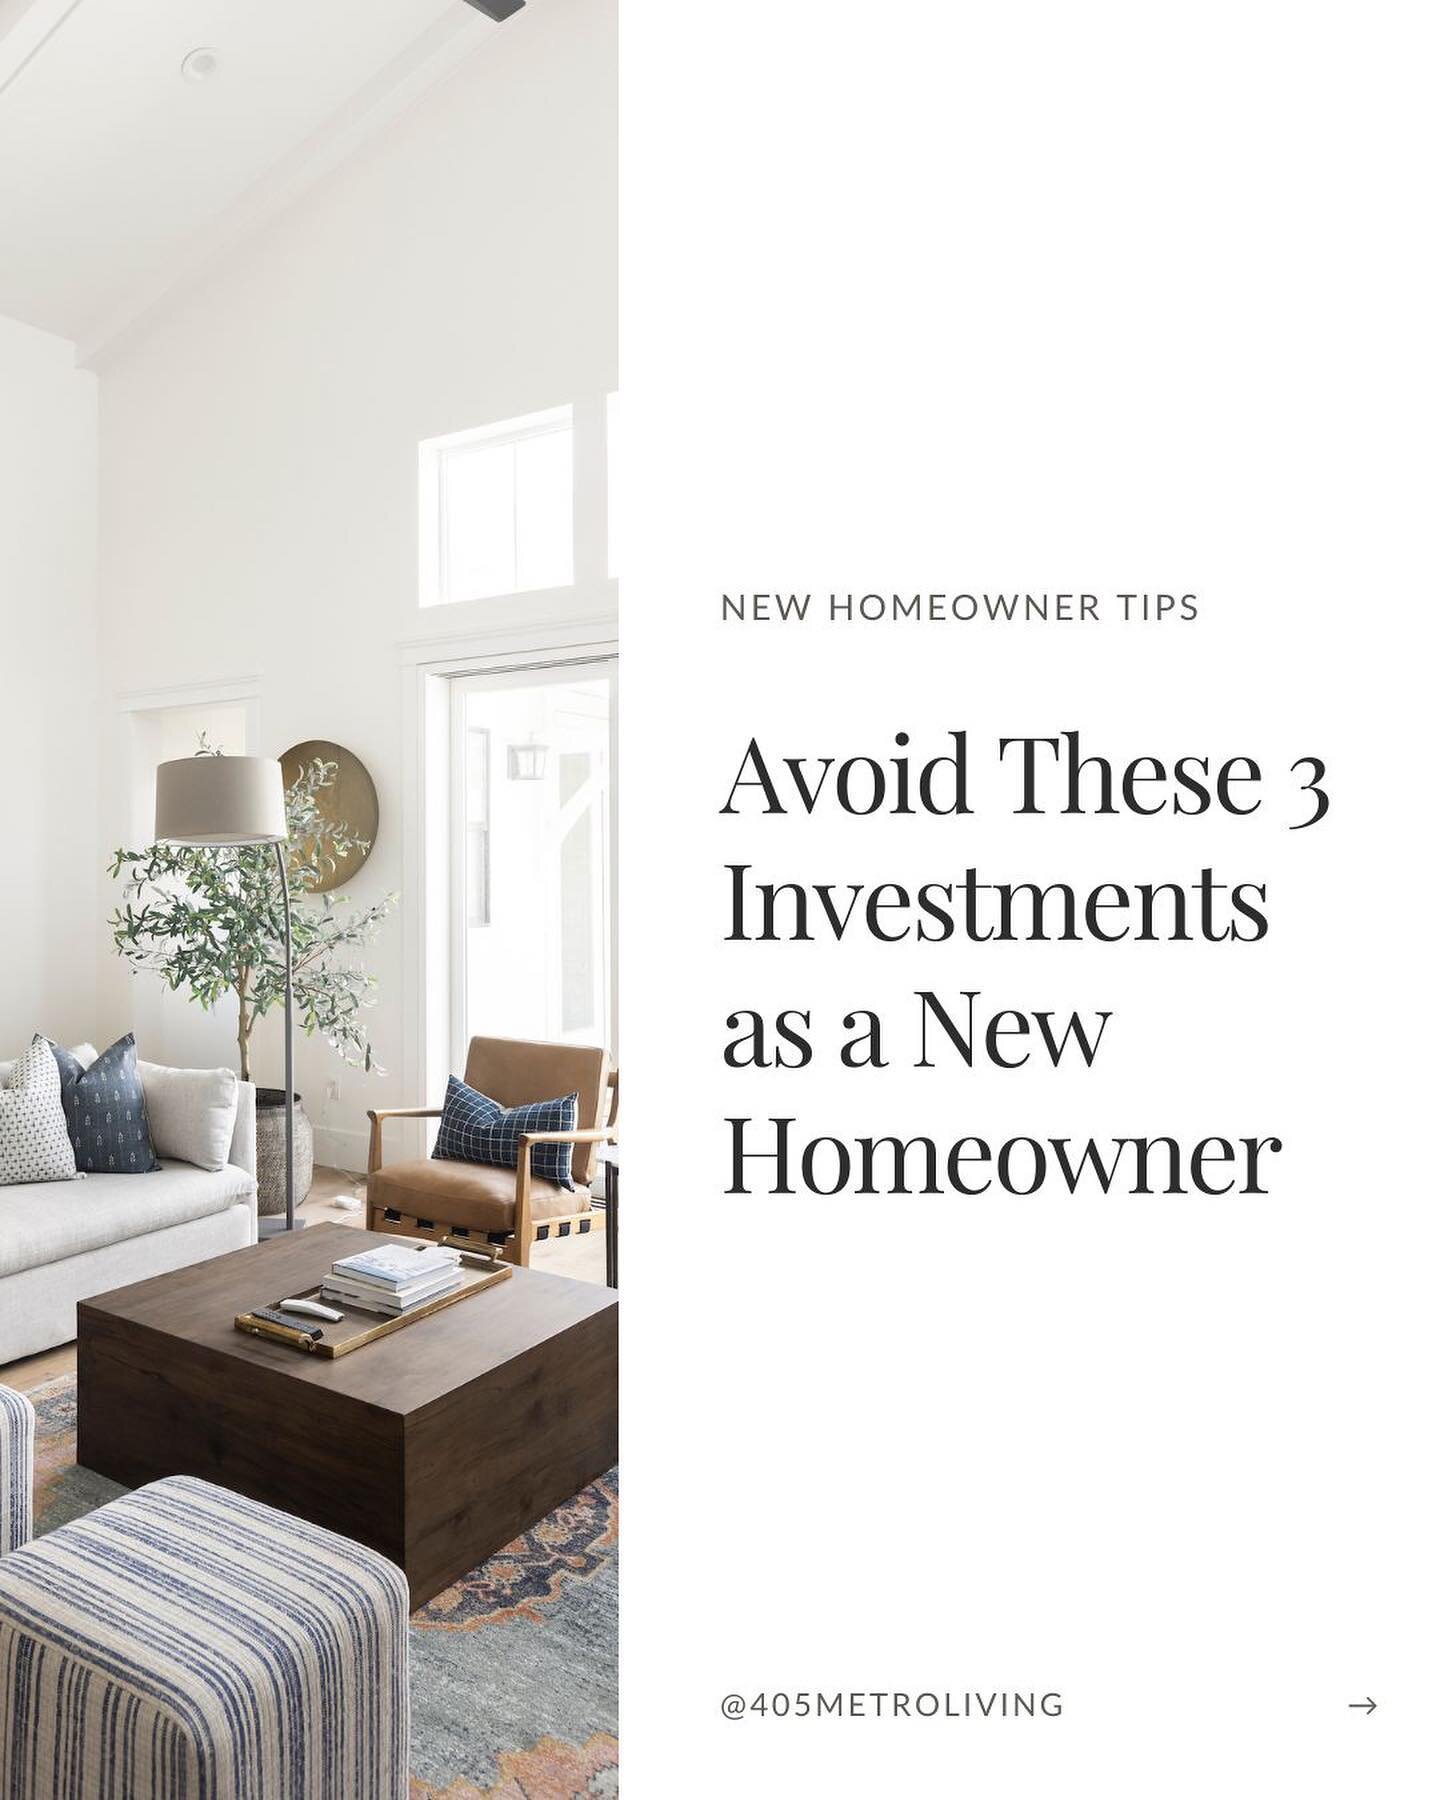 Ready to buy and make home your happy place? Then, you need to sidestep these three rookie mistakes:

1. Making major changes too soon. Instead, move in, live, and discover exactly how you use your spaces before costly renovations.
2. Hiring a shady 